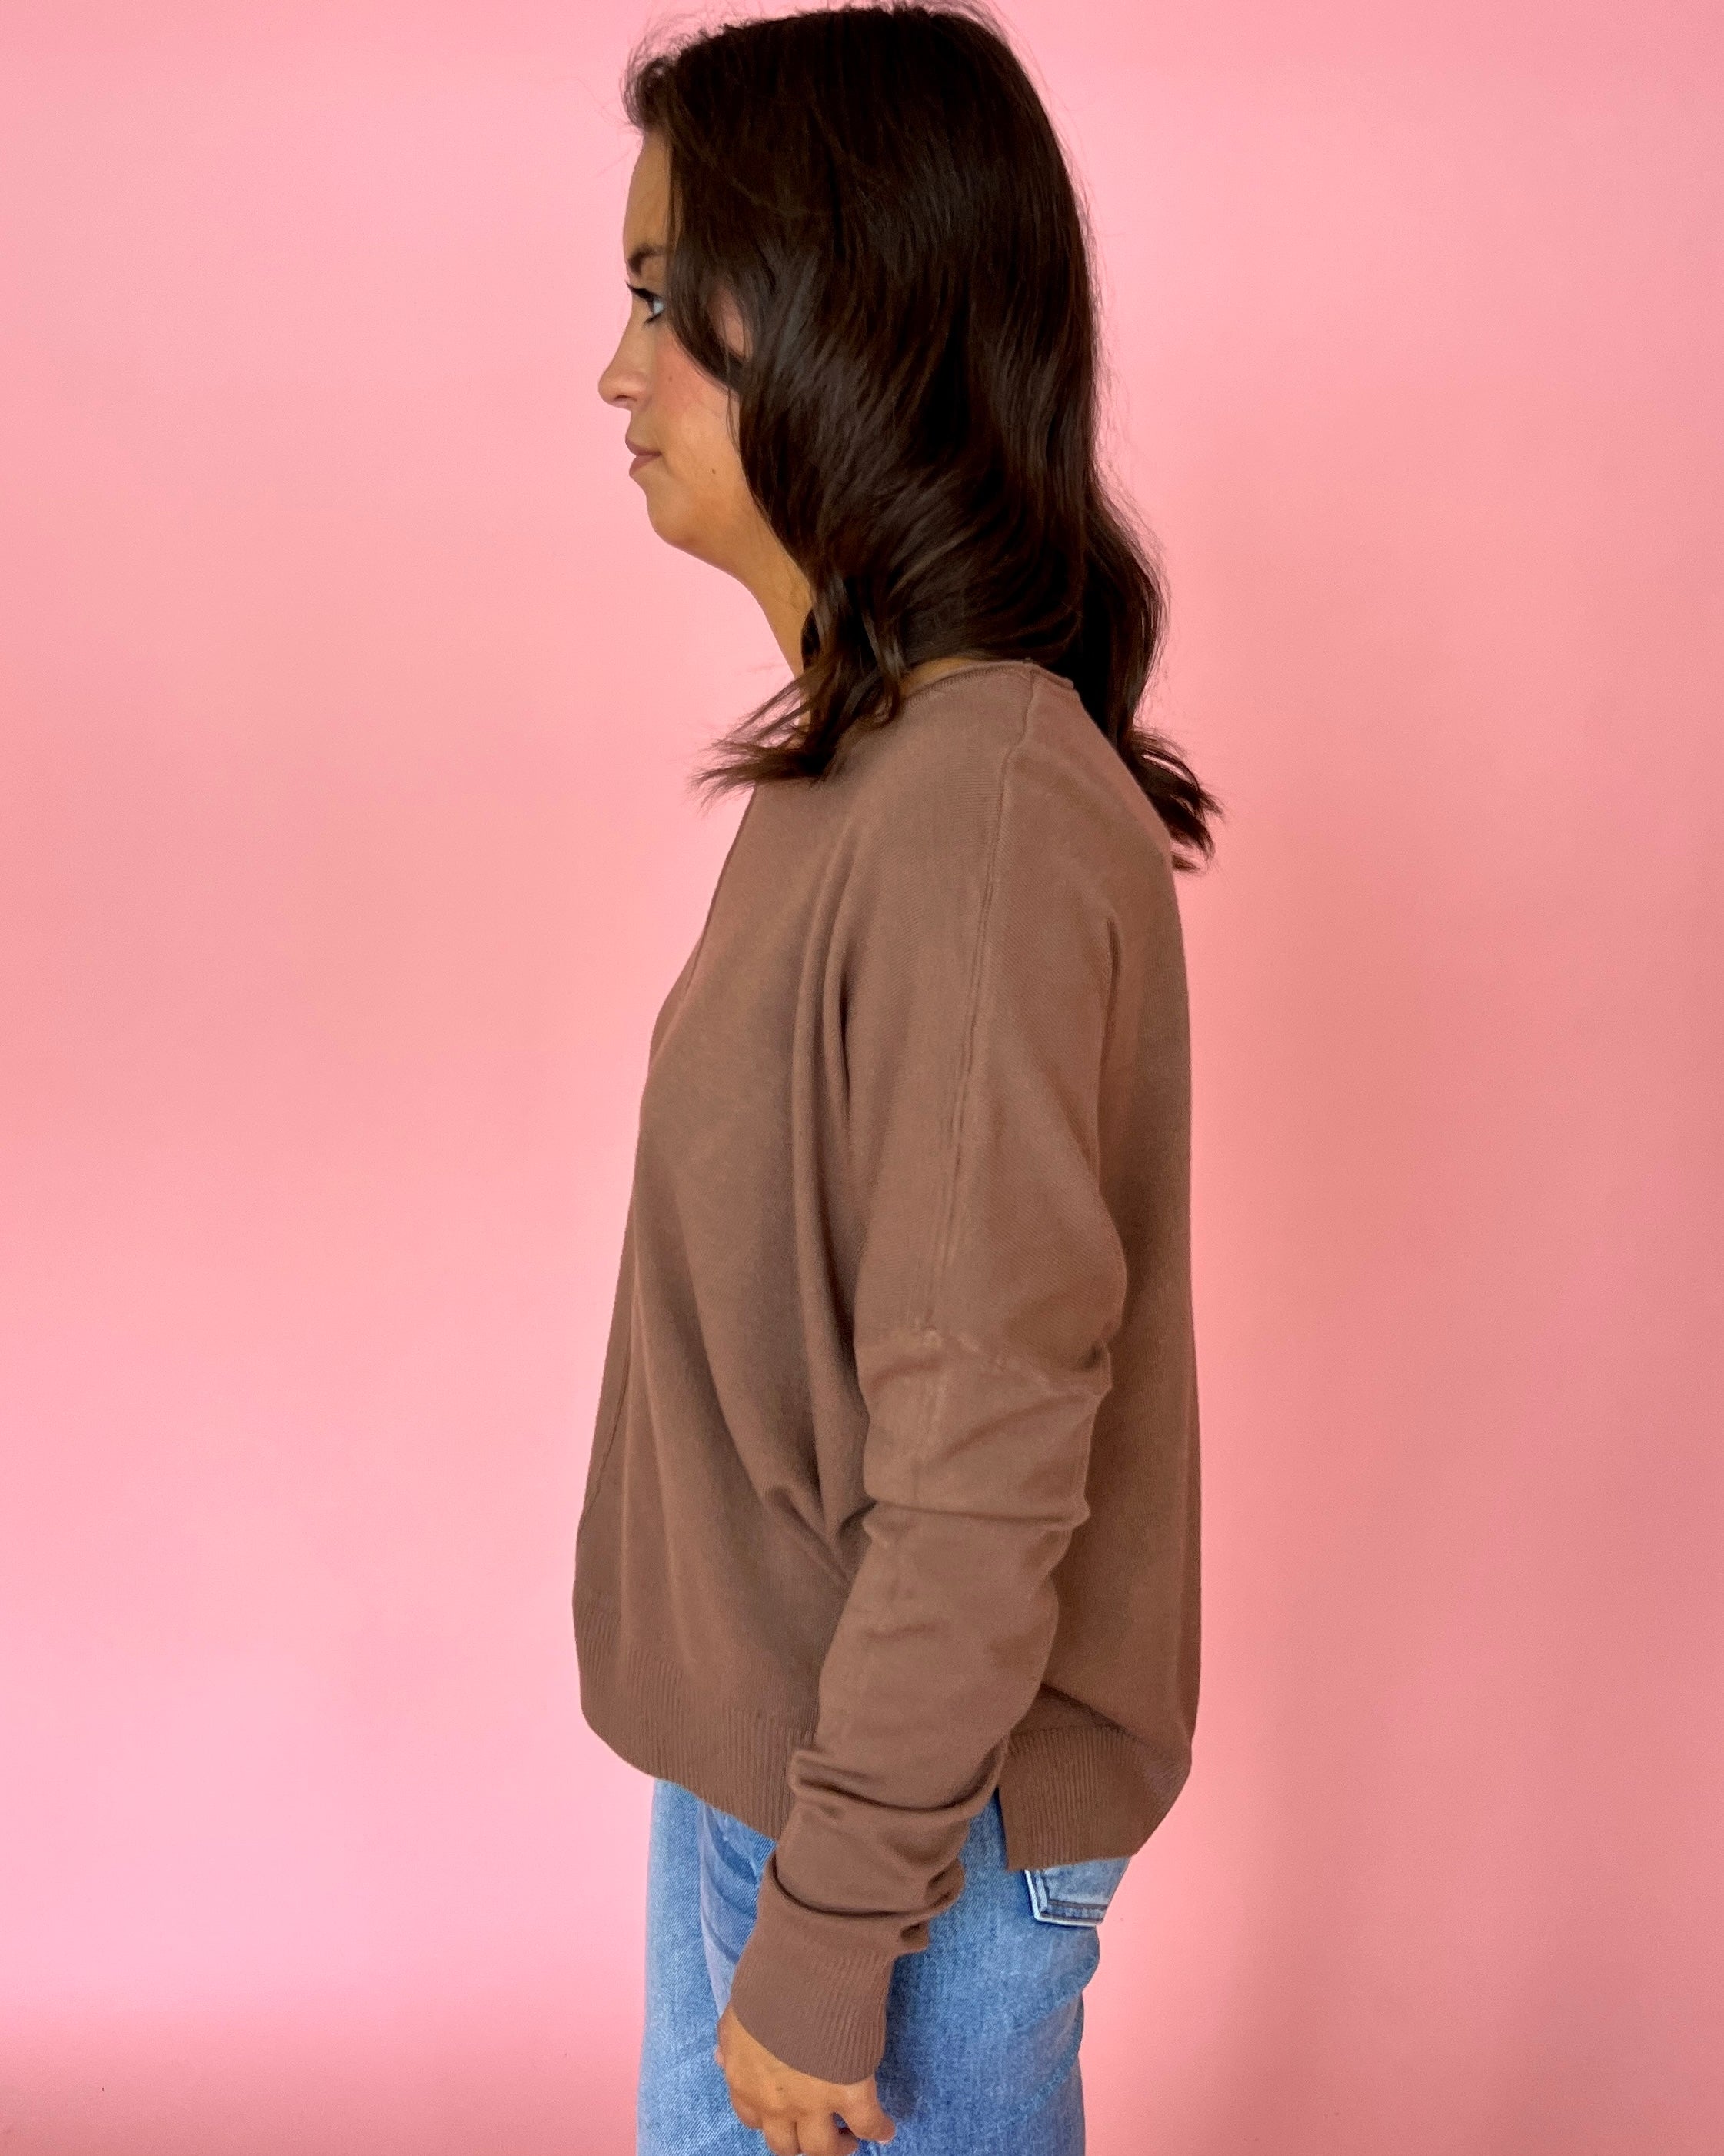 Tucked Away Chocolate Brown Sweater-Shop-Womens-Boutique-Clothing